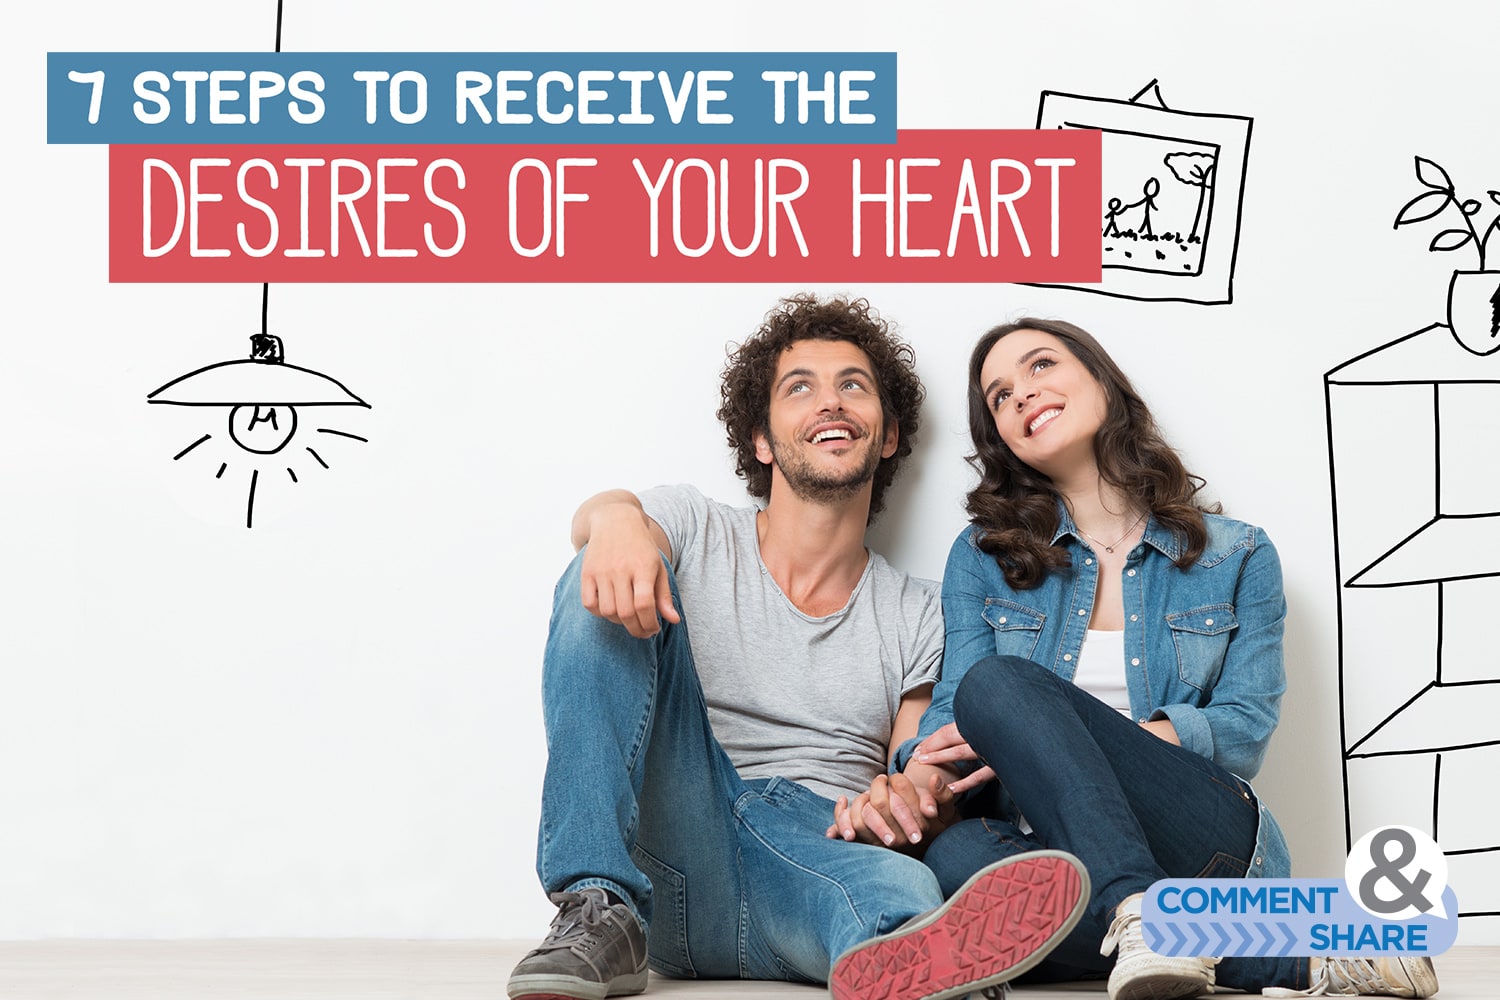 7 Steps to Receive the Desires of Your Heart